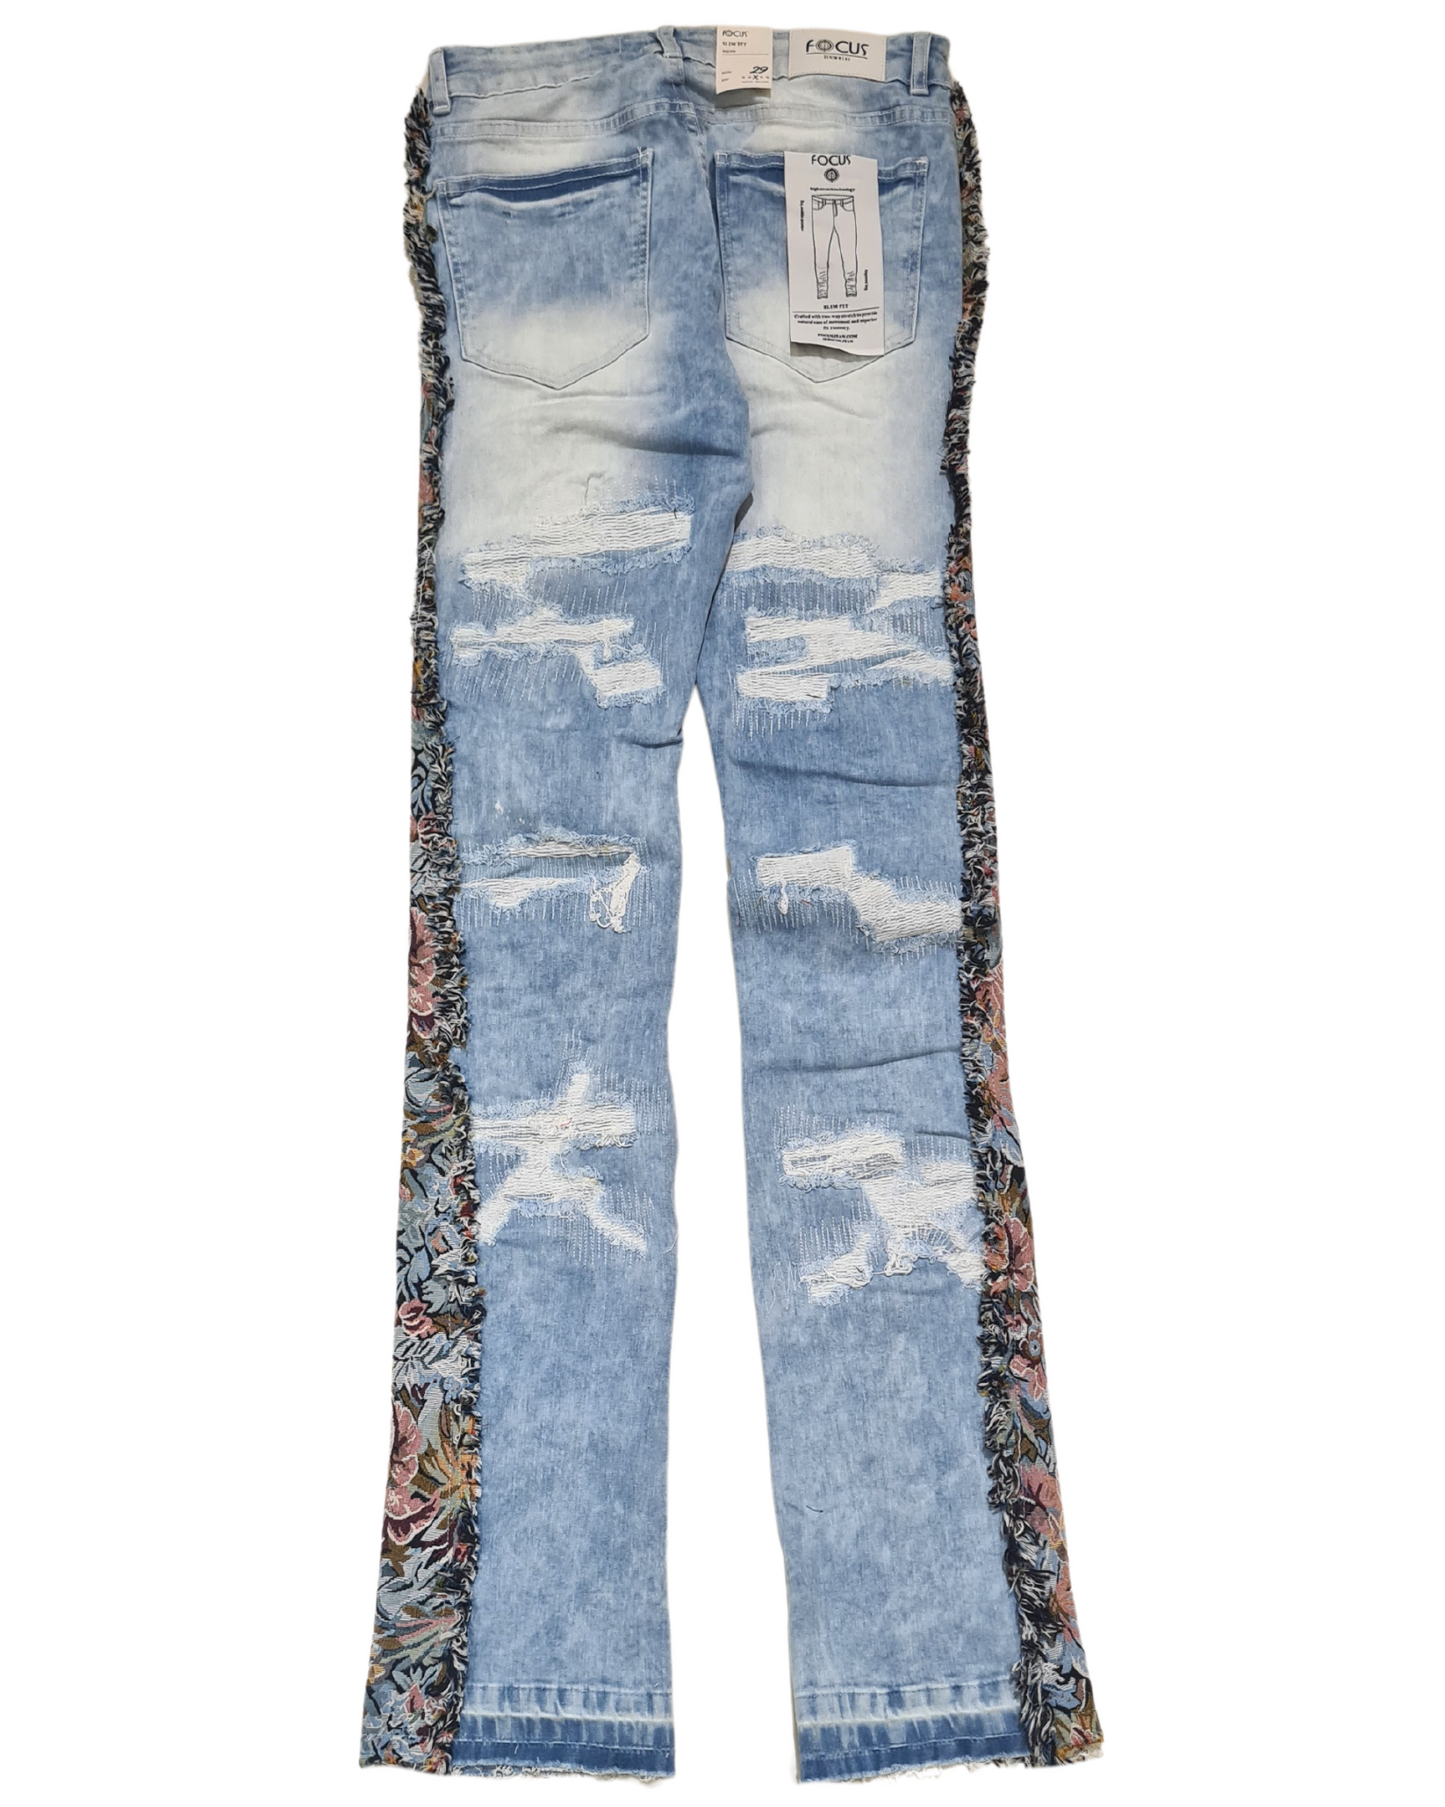 Tapestry Insert Stacked Jeans 3611